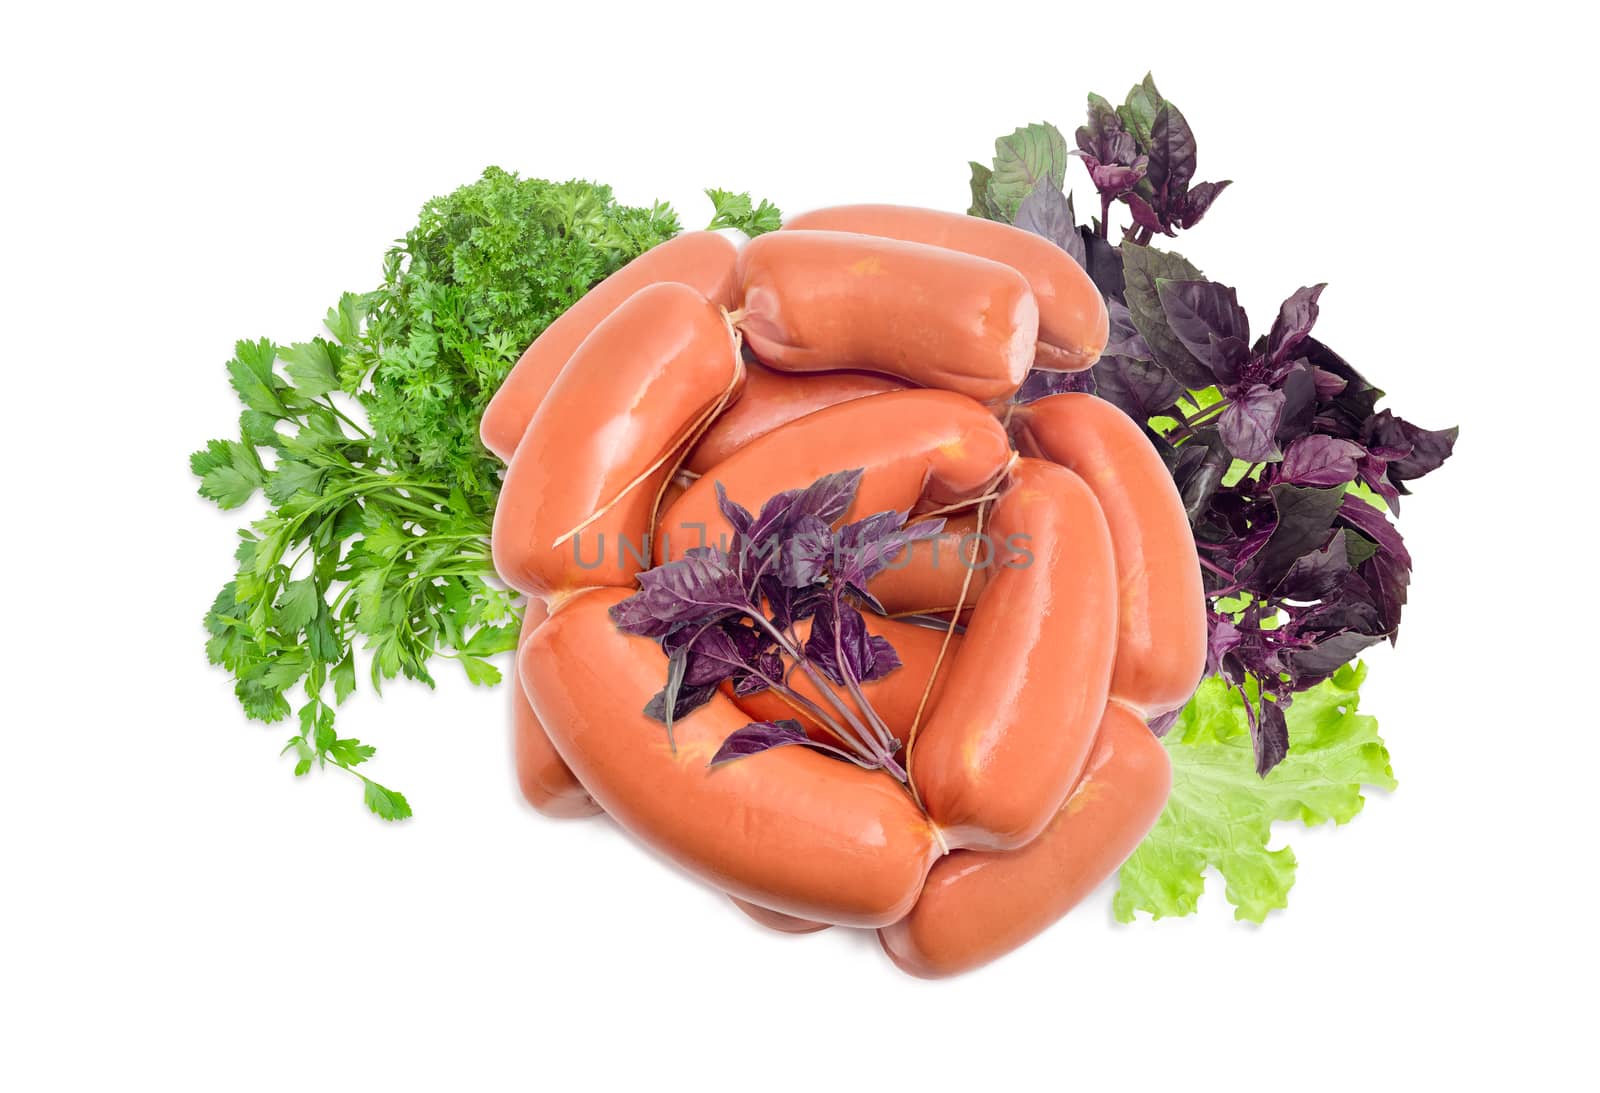 Pile of the uncooked wieners bound by twine and leaves of purple basil, lettuce, and parsley on a light background
